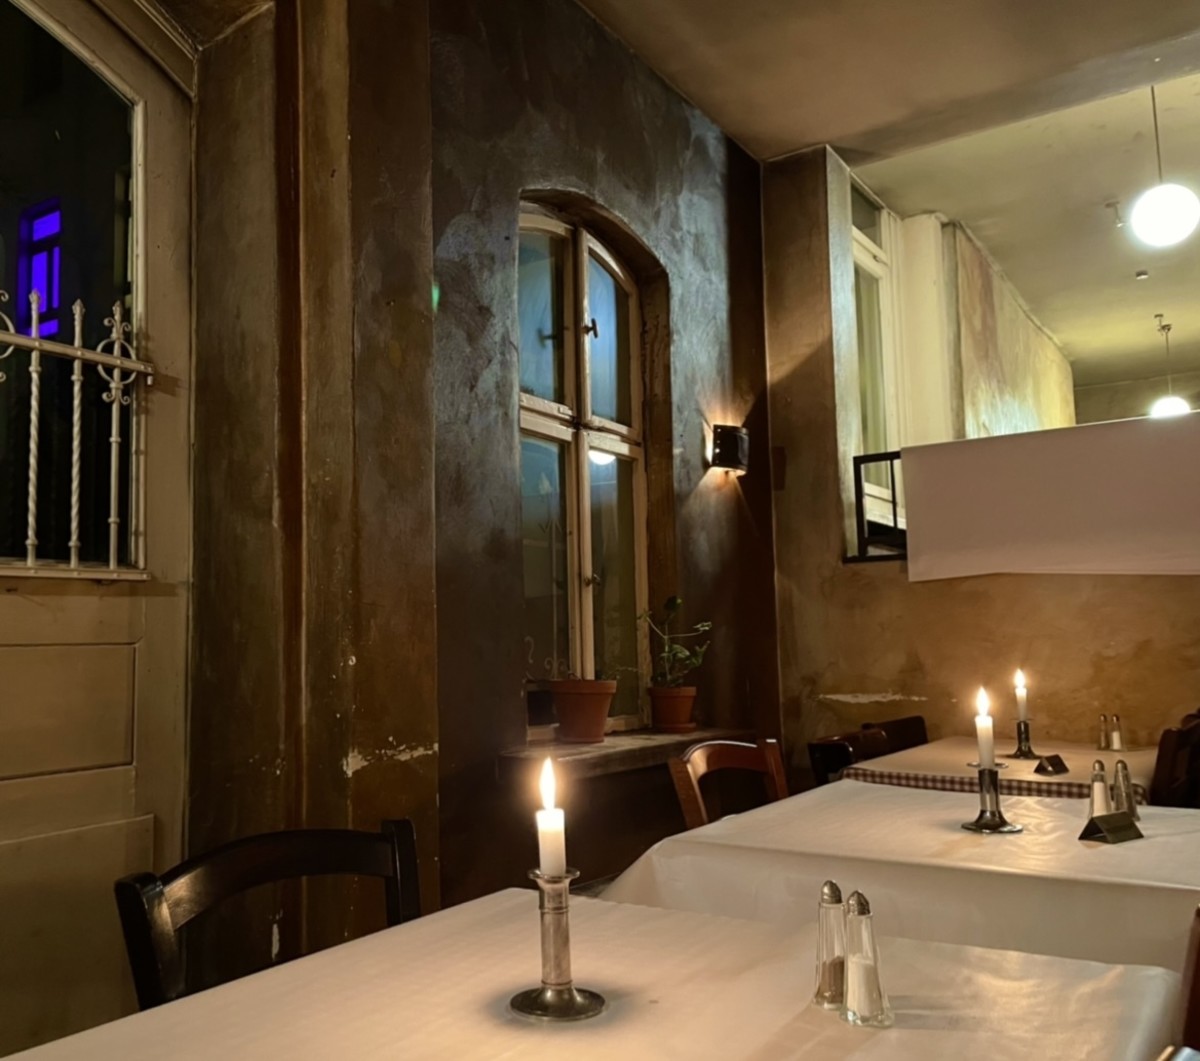 The elegant restaurant "Gorgonzola Club" offers authentic and delicious italian food. Calm atmosphere and perfect for a romantic dinner. Located near Oranien Platz. Open in the evening.